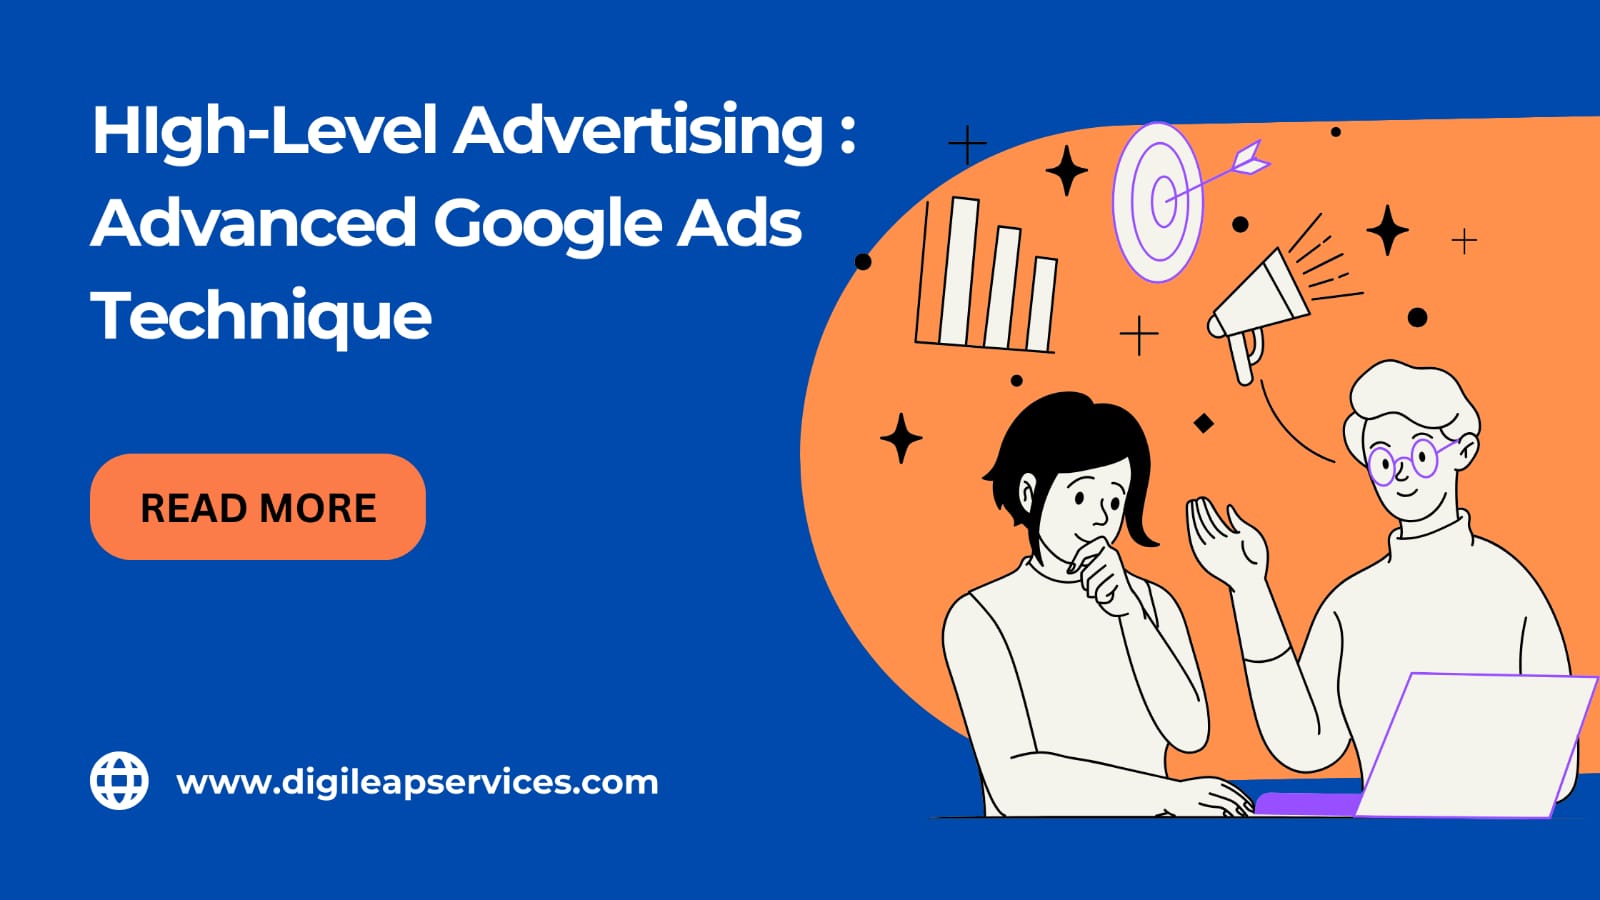 High-Level Advertising: Advanced Google Ads Techniques